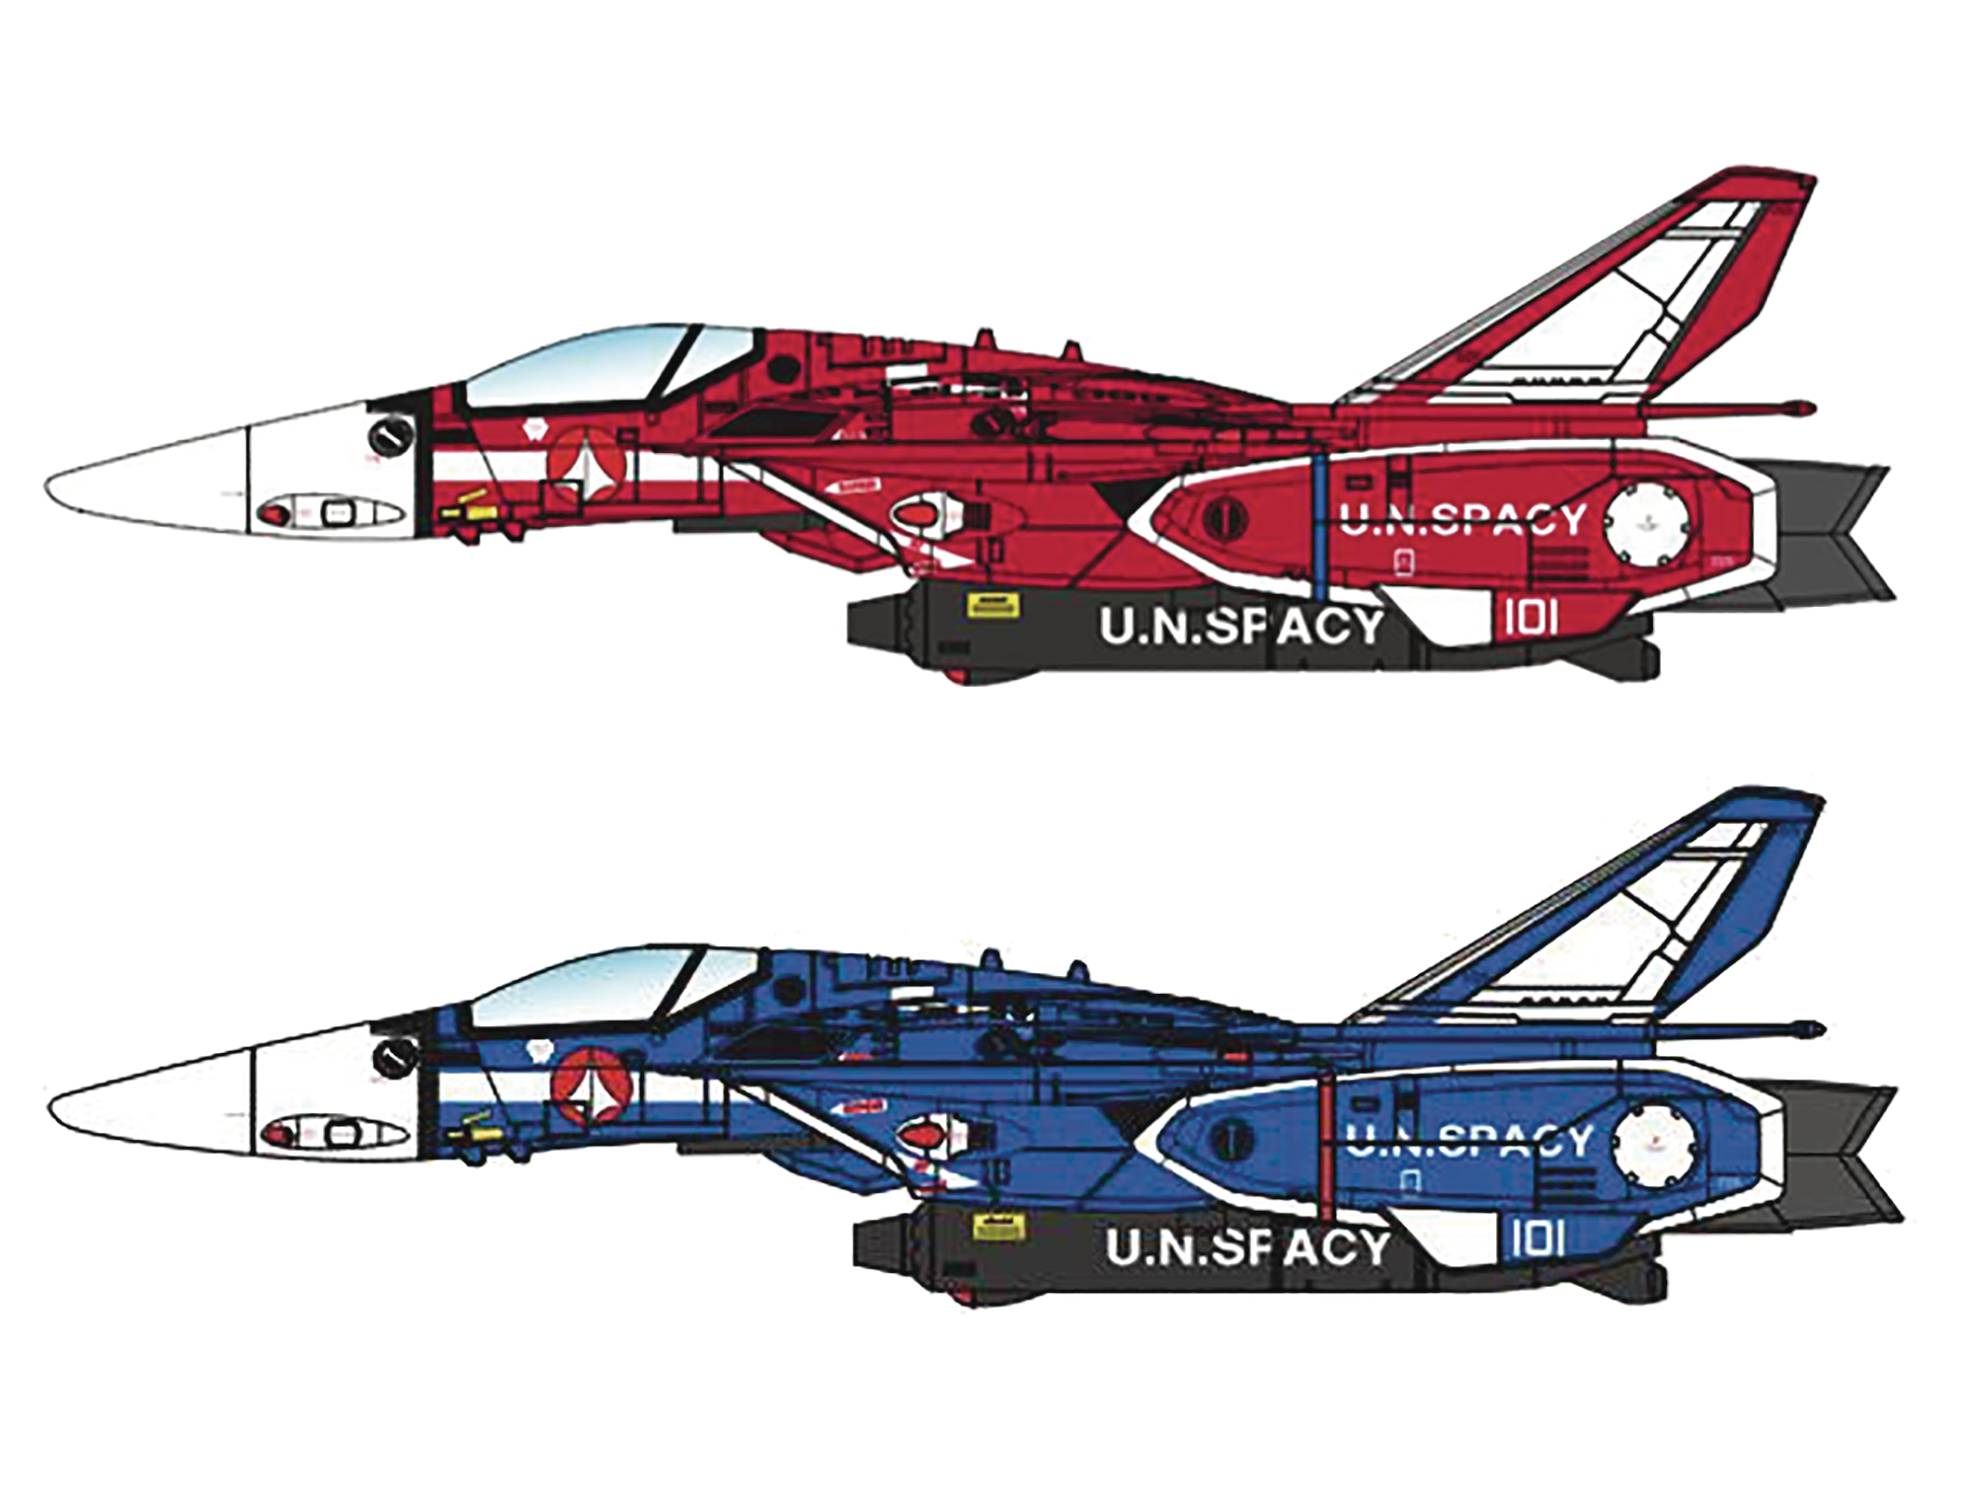 Macross Robotech VF-1J Fighter Valkyrie Max & Miriya Set 1:72 Scale Collectible 